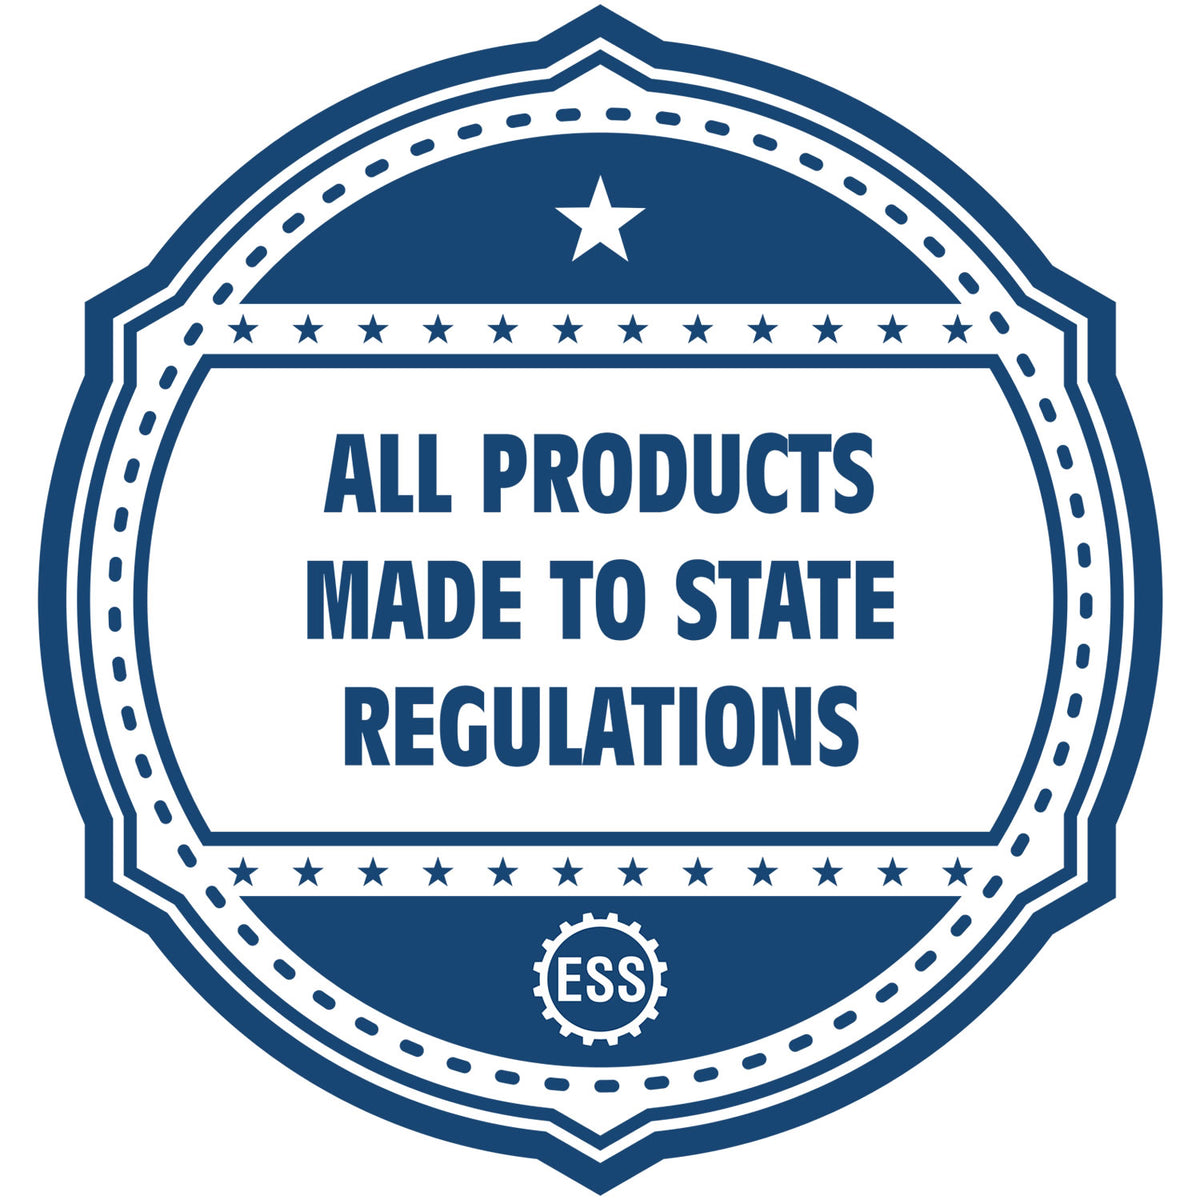 An icon or badge element for the Soft Illinois Professional Engineer Seal showing that this product is made in compliance with state regulations.